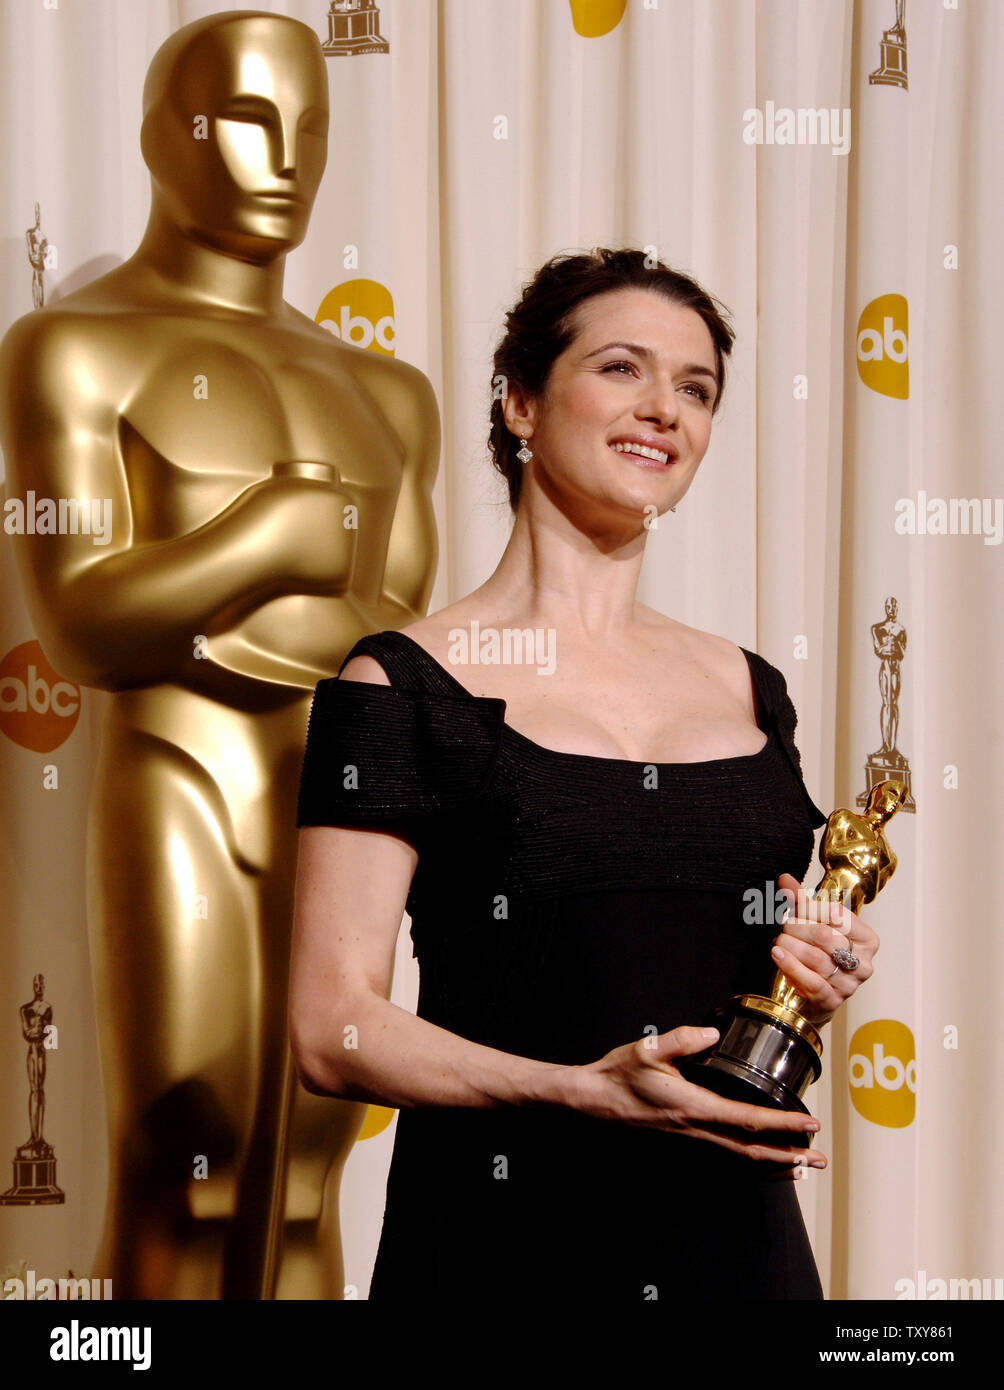 British actress Rachel Weisz appears backstage with her Oscar for best supporting actress for her work in 'The Constant Gardener' at the 78th Academy Awards in the Hollywood section of Los Angeles, California on March 5, 2006.  (UPI Photo/Jim Ruymen) Stock Photo